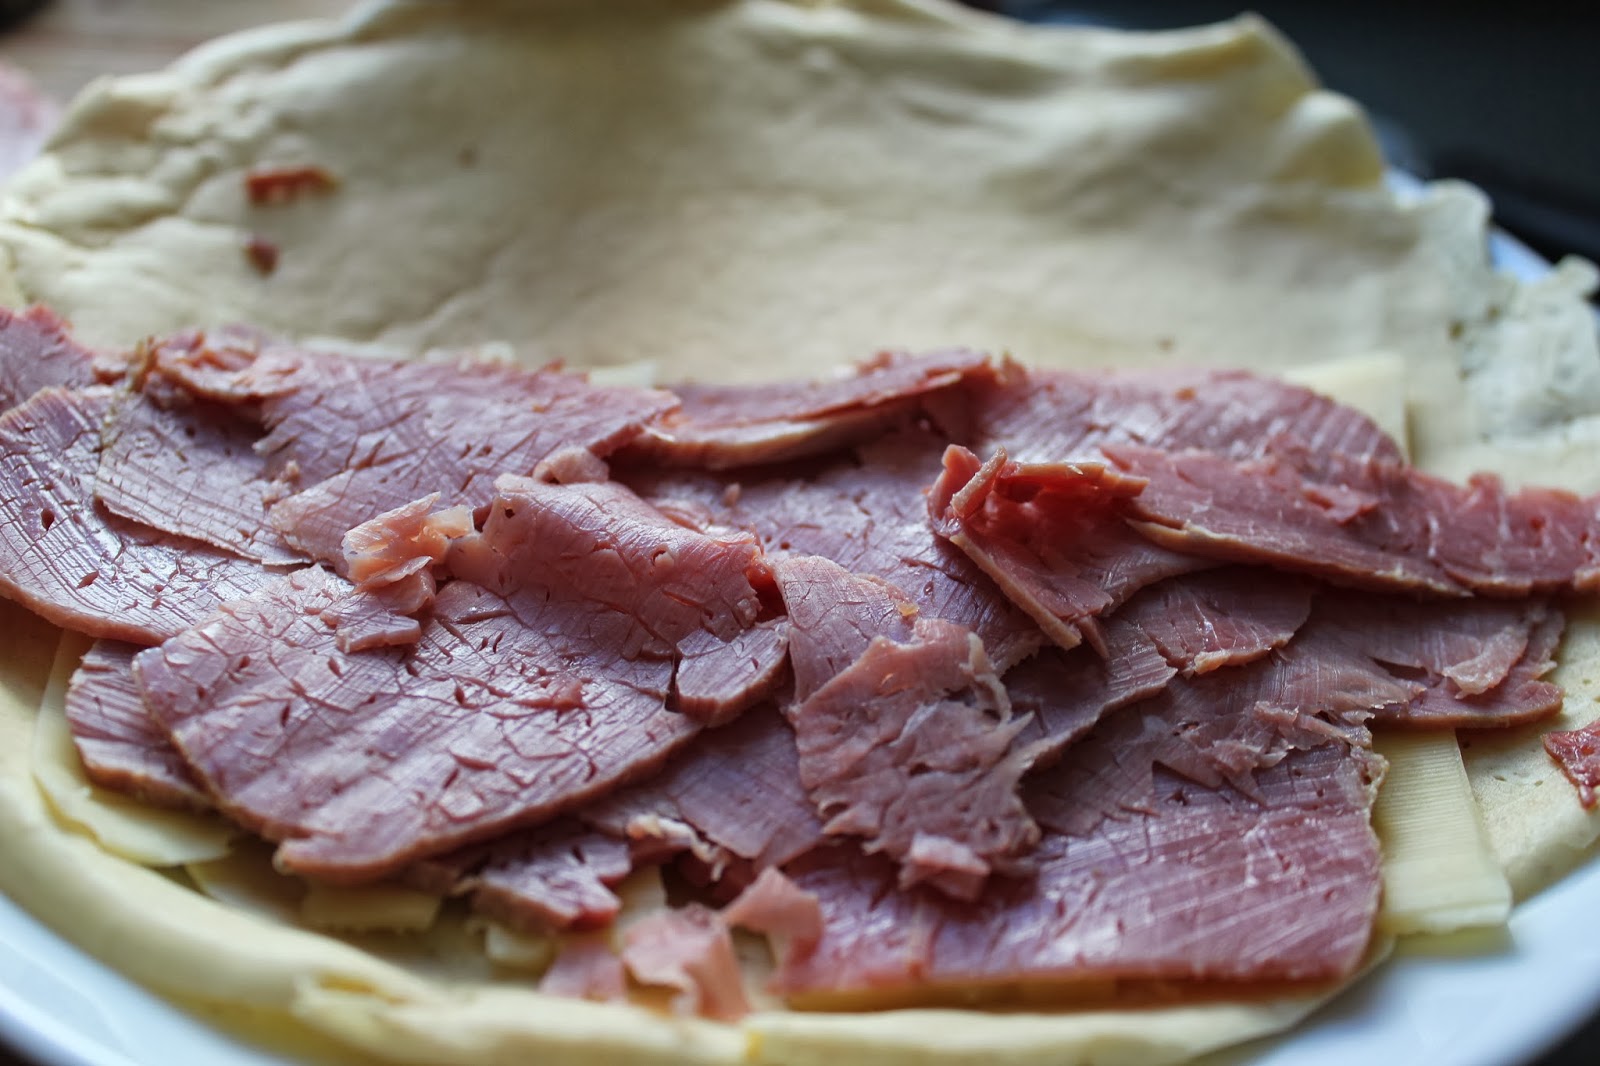 Rye crepes with cheese and corned beef